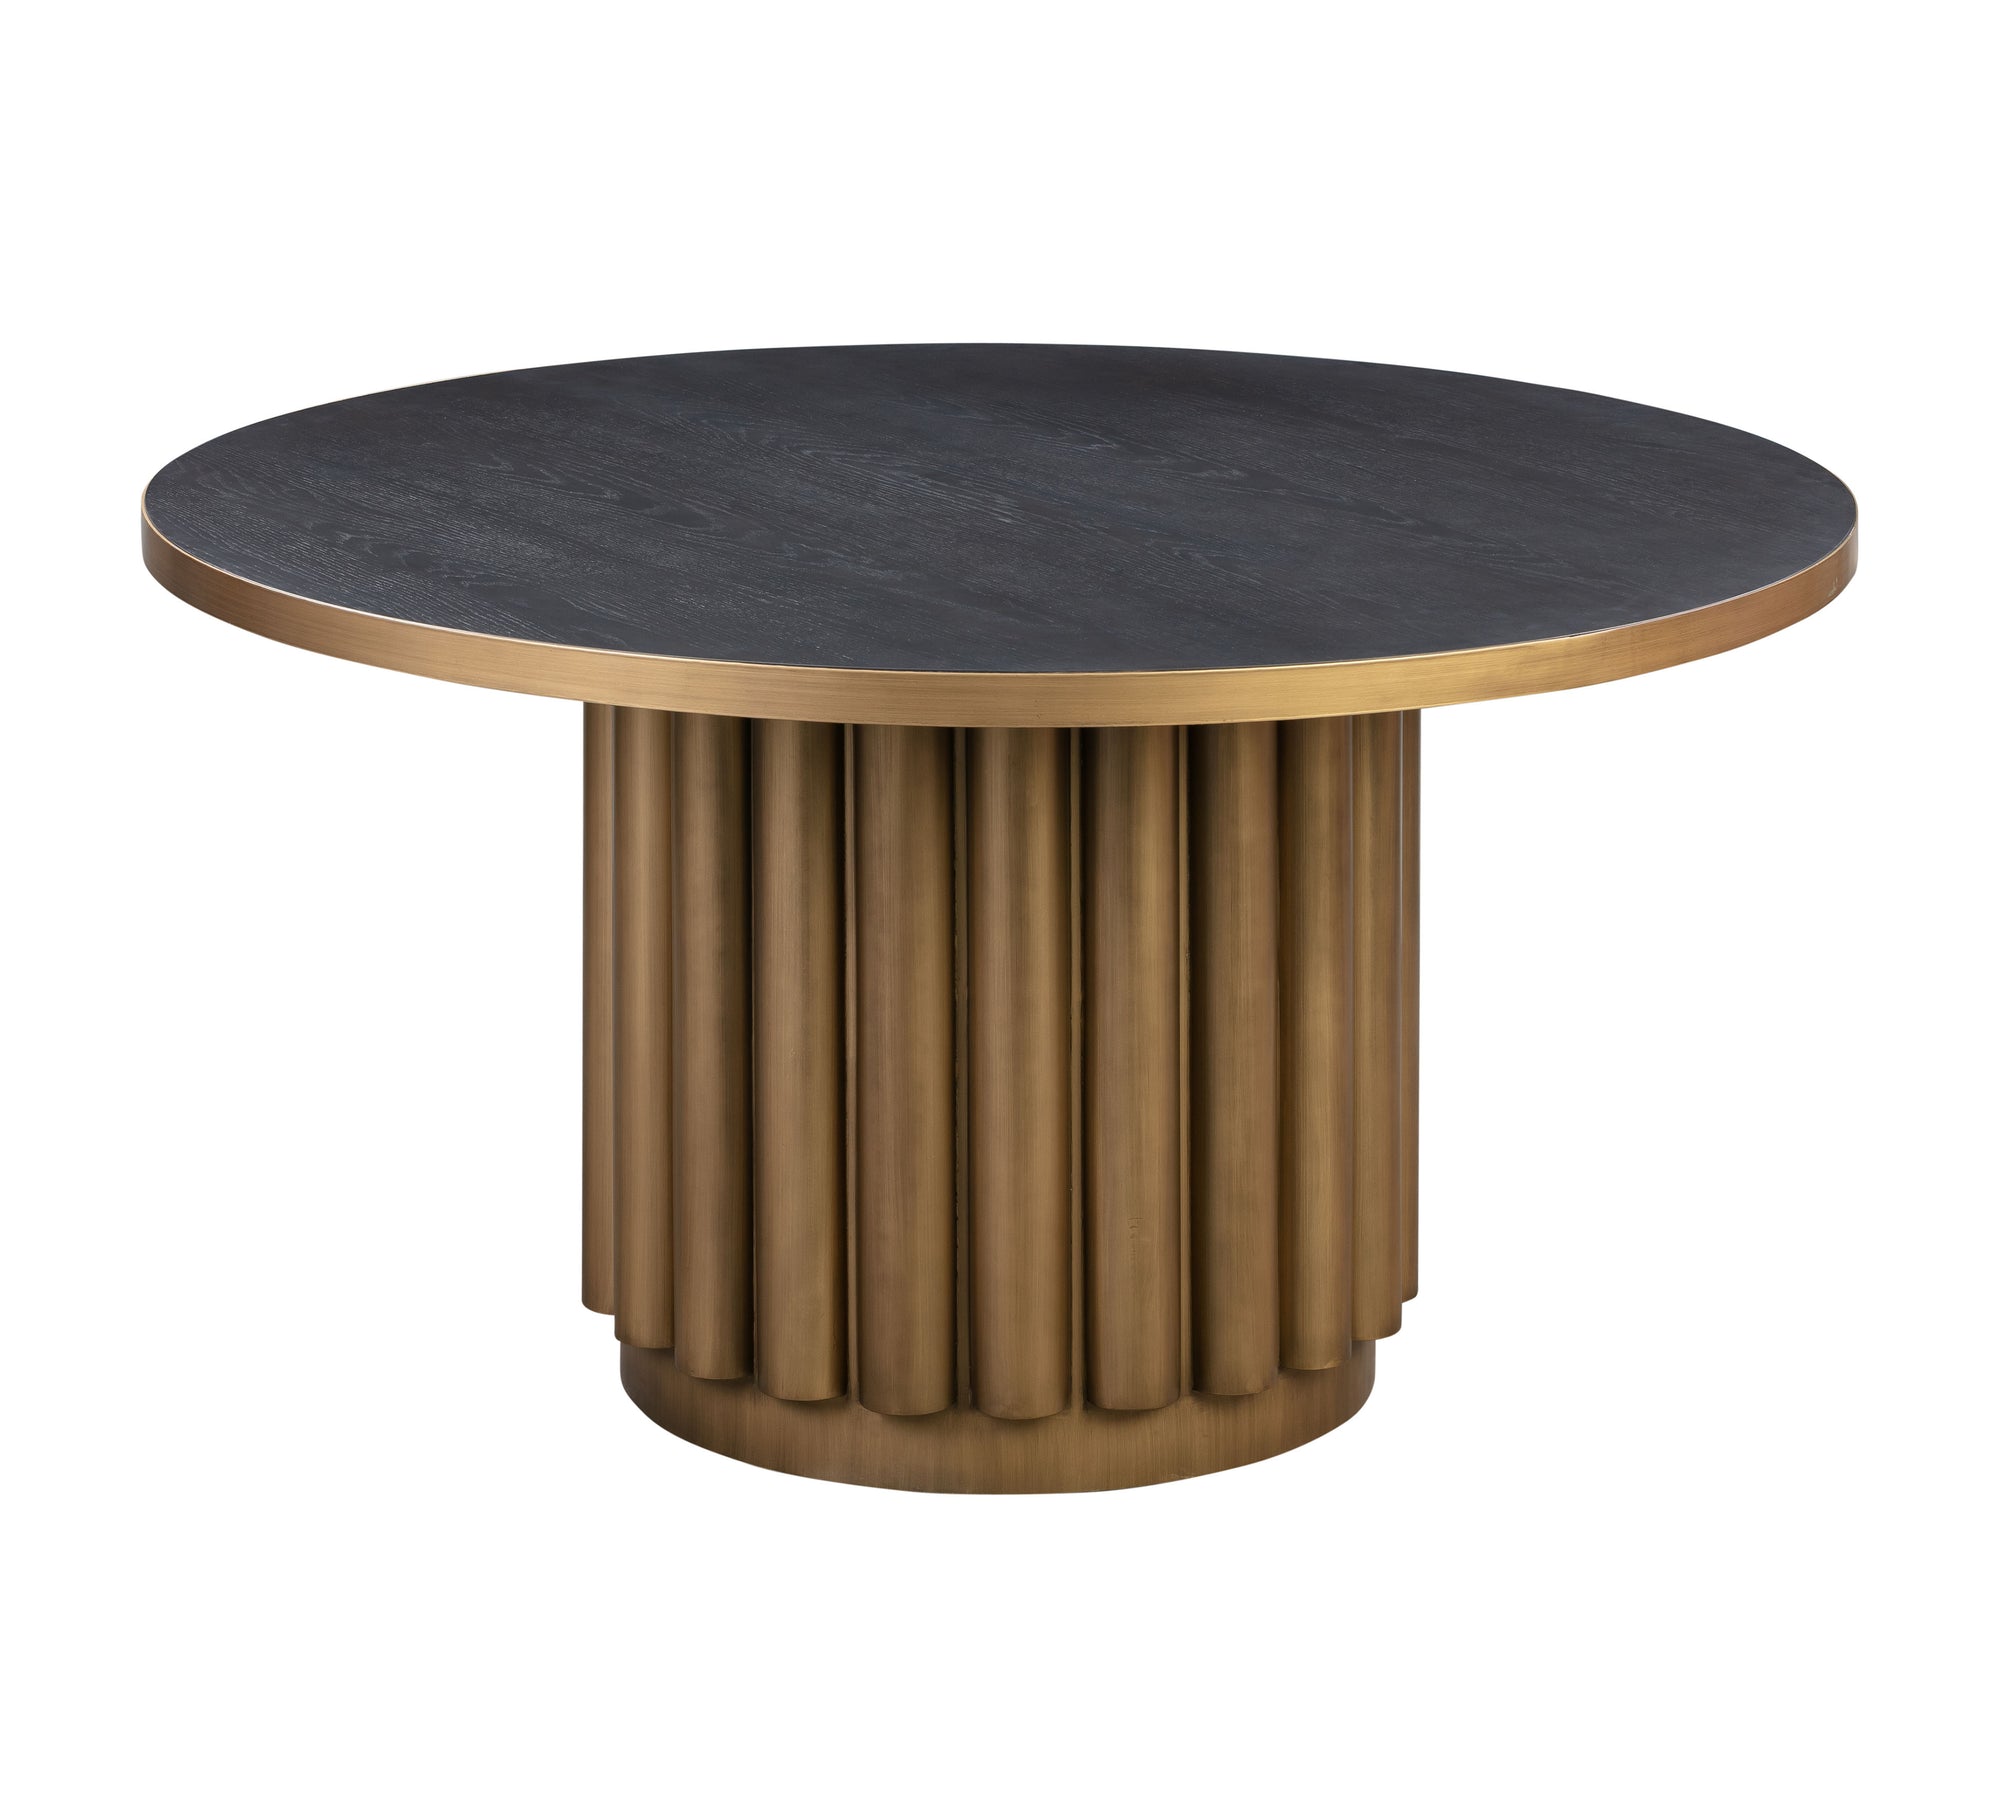 MODTEMPO-Kali Round Dining Table-Dining Tables-MODTEMPO